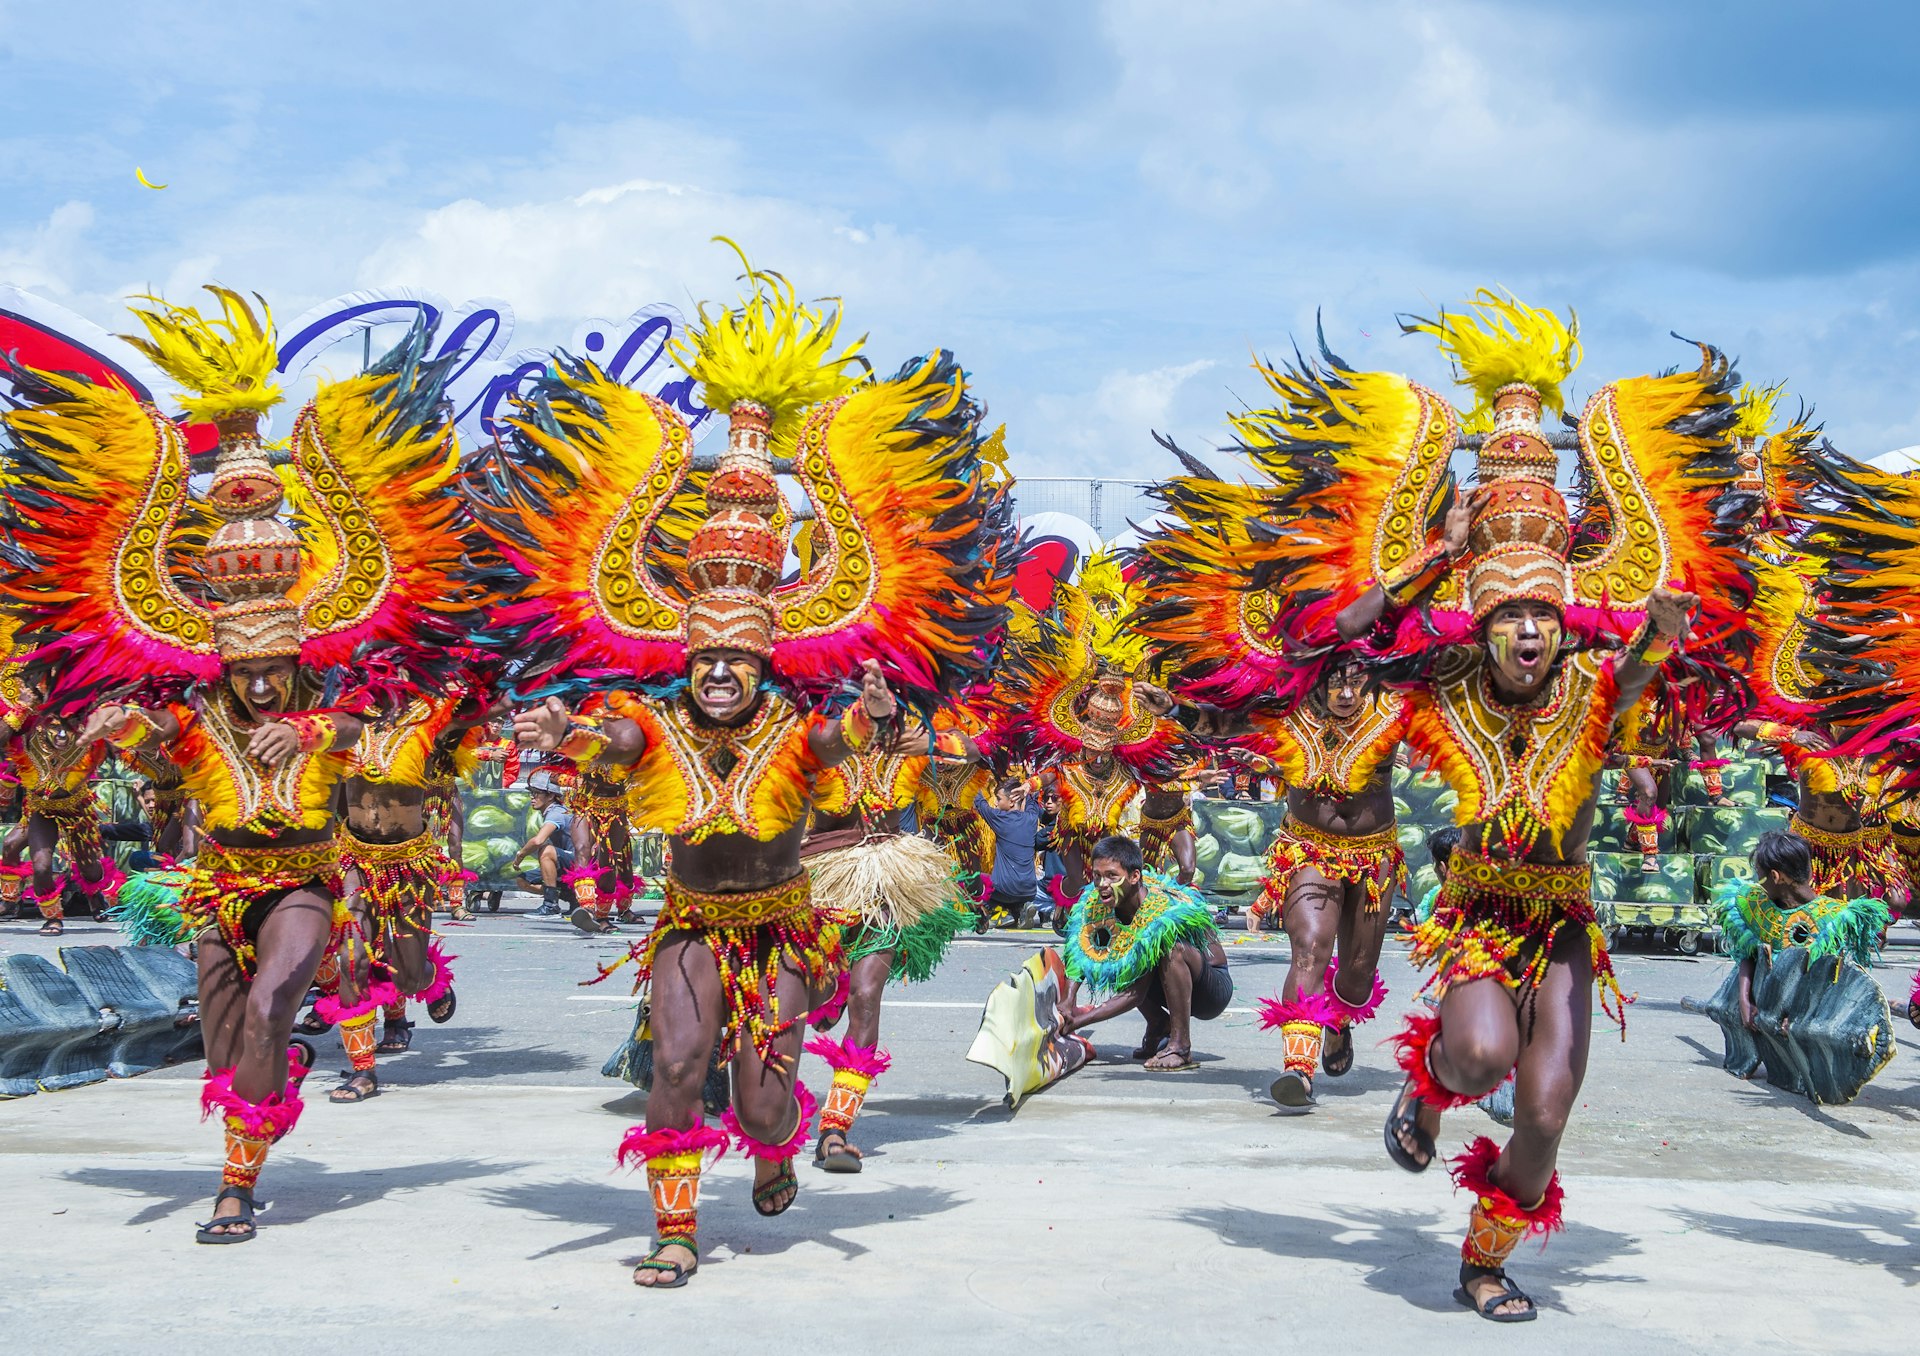 Participants in the Dinagyang festival, Iloilo, the Philippines